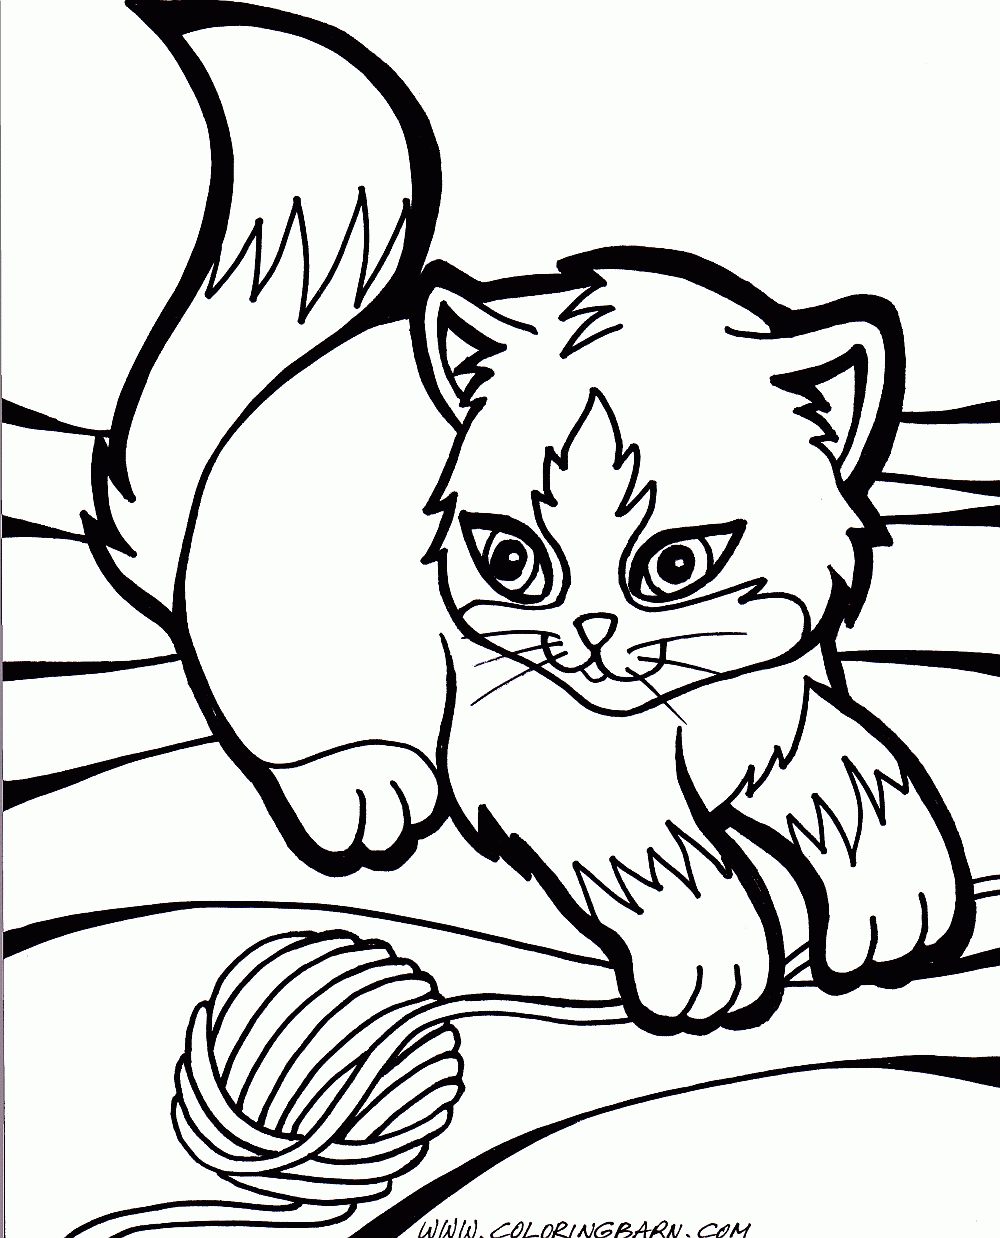 Funny Cute Cat Coloring Pages #1776 Cute Cat Coloring Pages ...